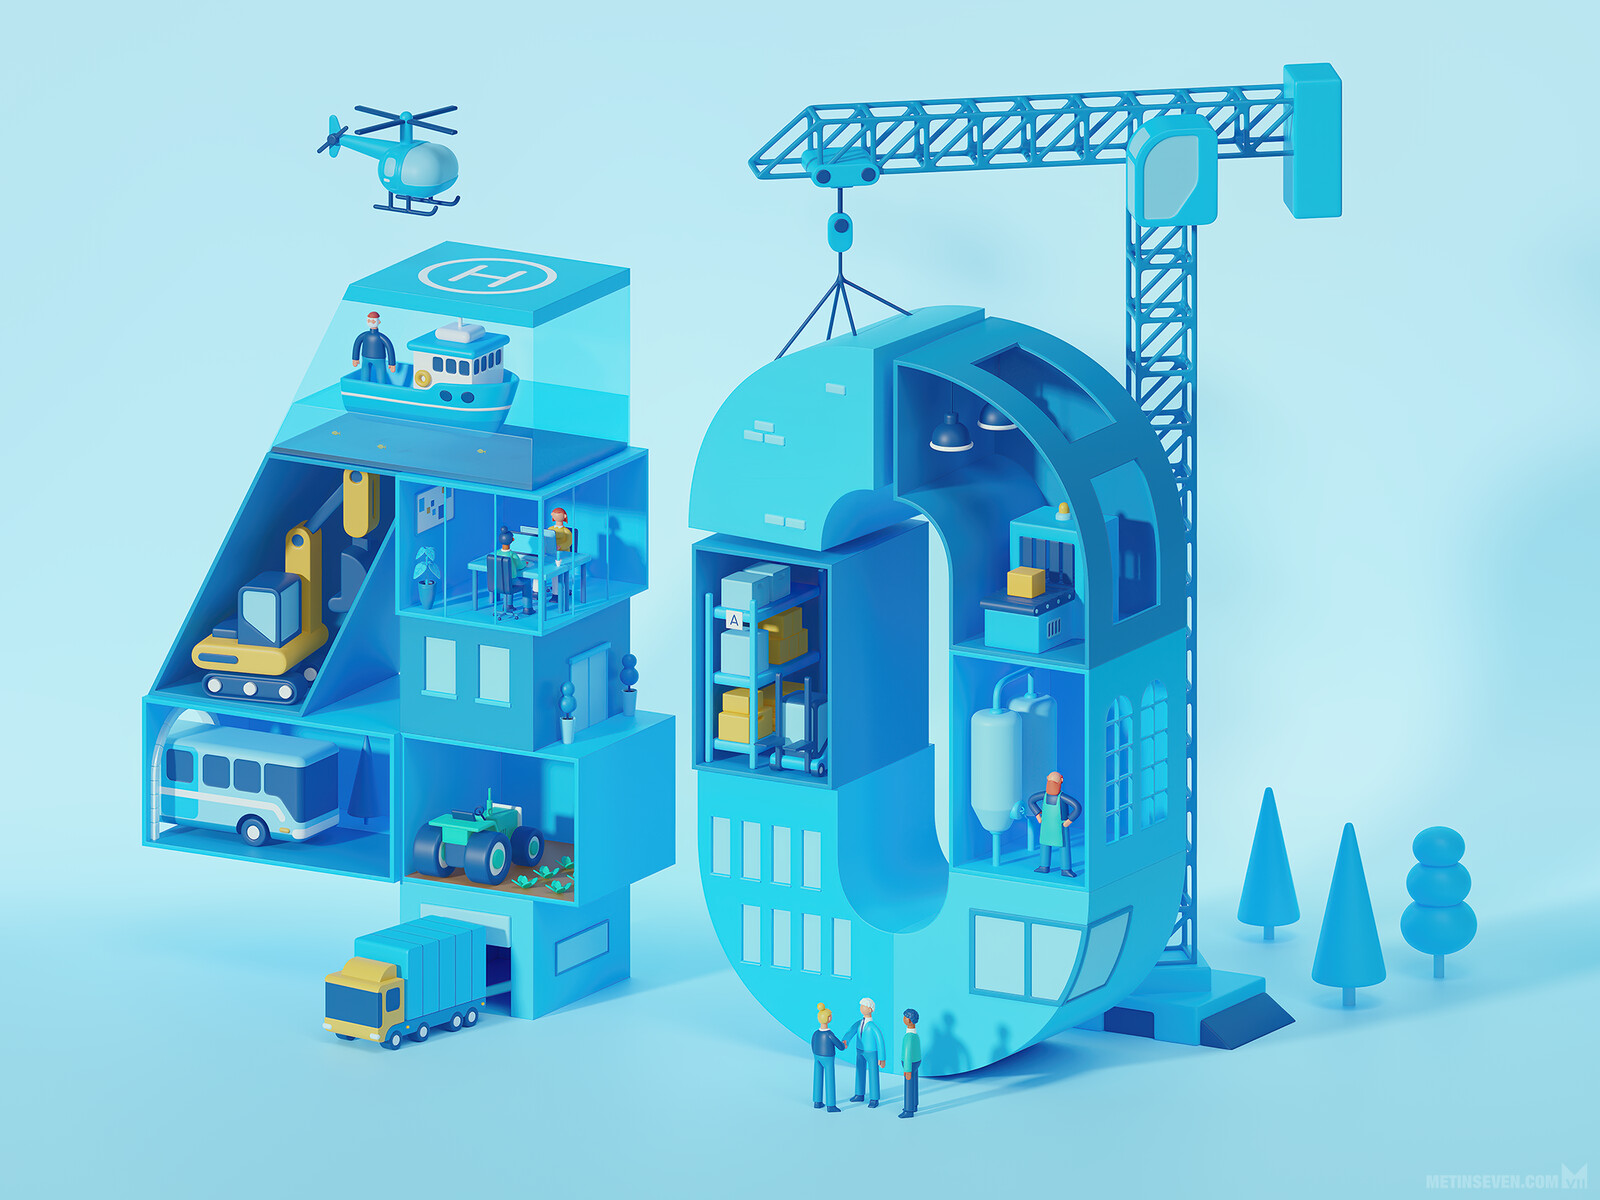 Stylized 3D infographics illustrations for the Dutch Patswerk studio